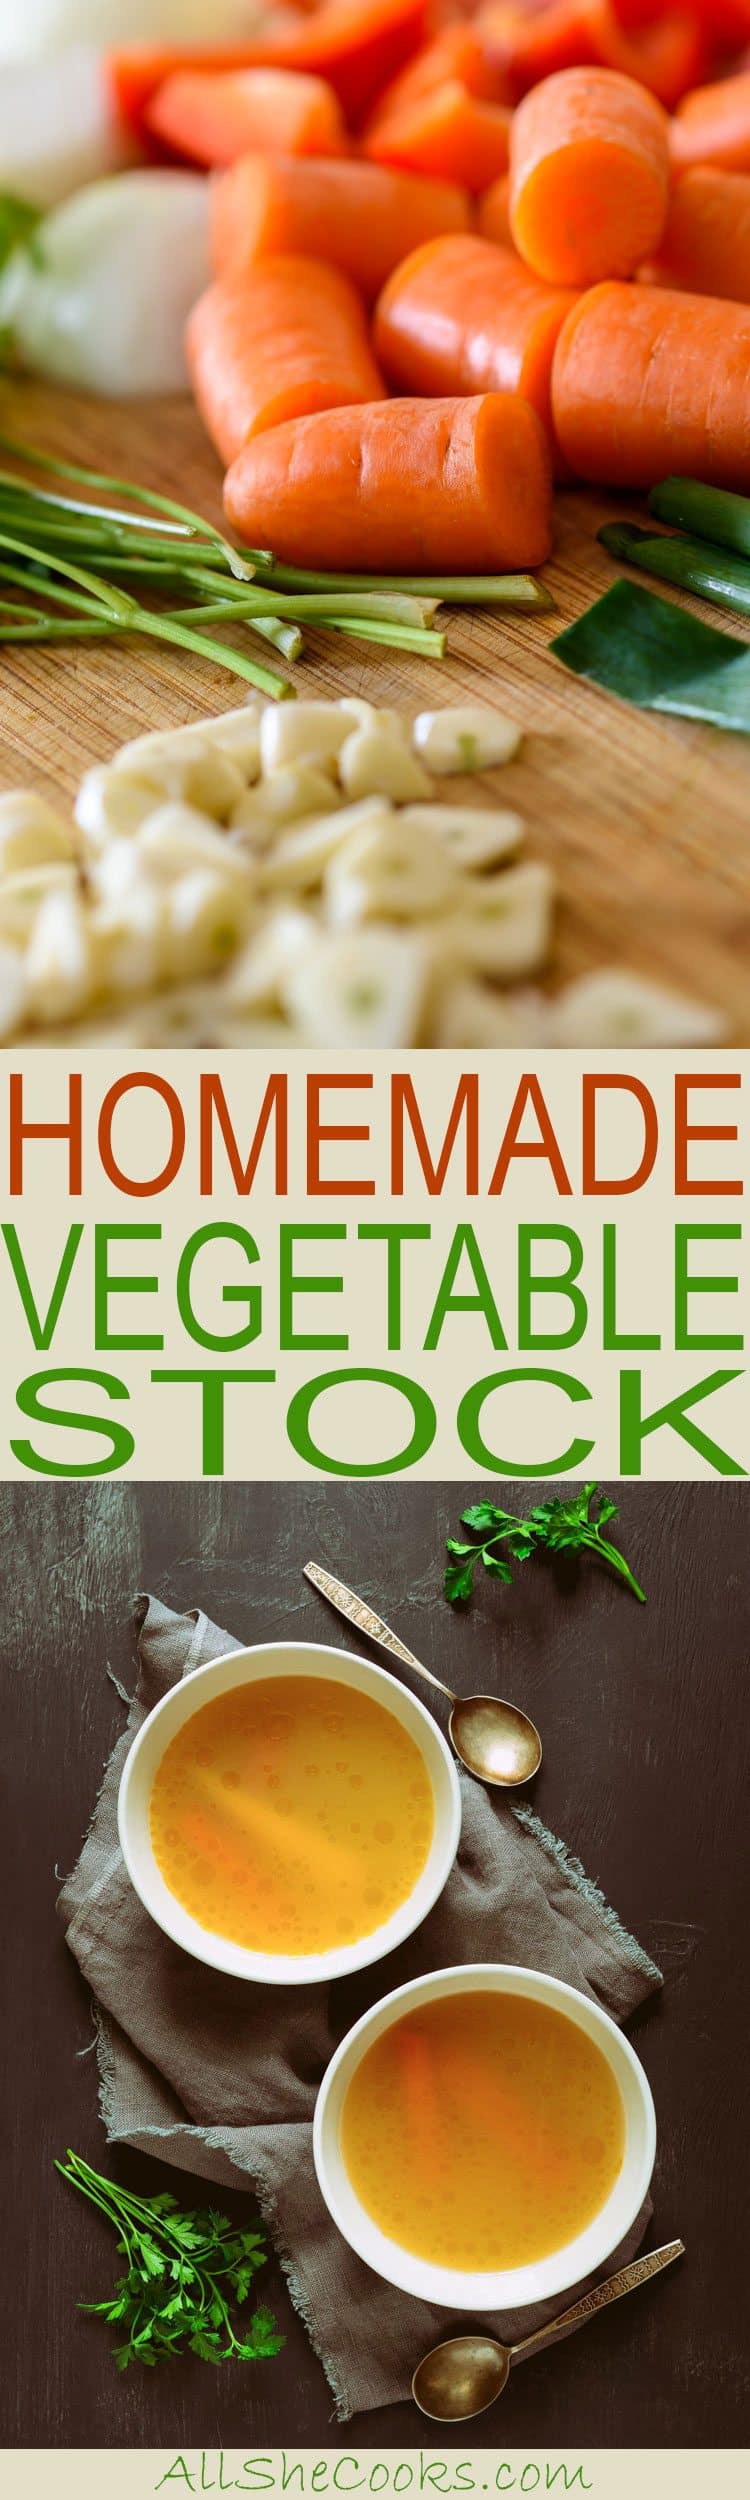 Homemade vegetable stock is an easy to make staple that is a basic ingredient in many recipes. Learn how to make vegetable stock and learn how to cook from scratch.